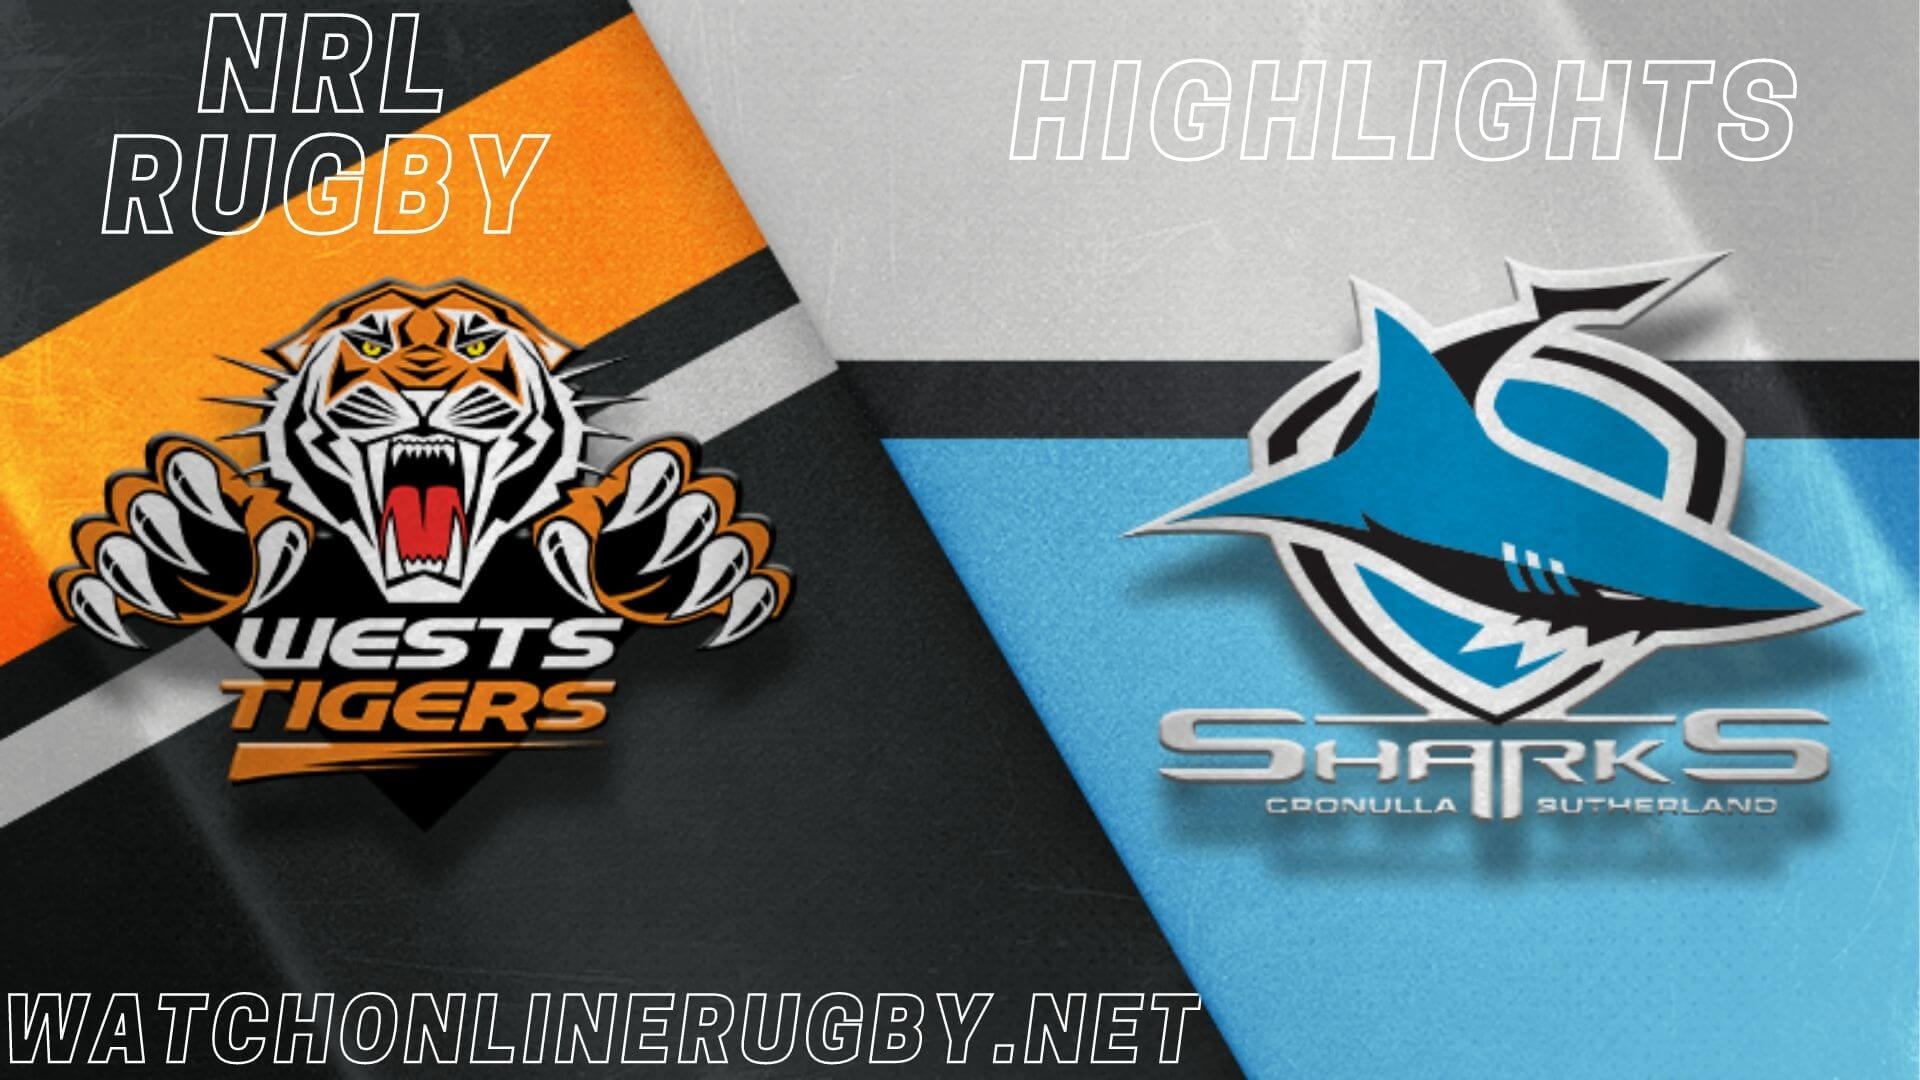 Wests Tigers Vs Sharks Highlights RD 22 NRL Rugby